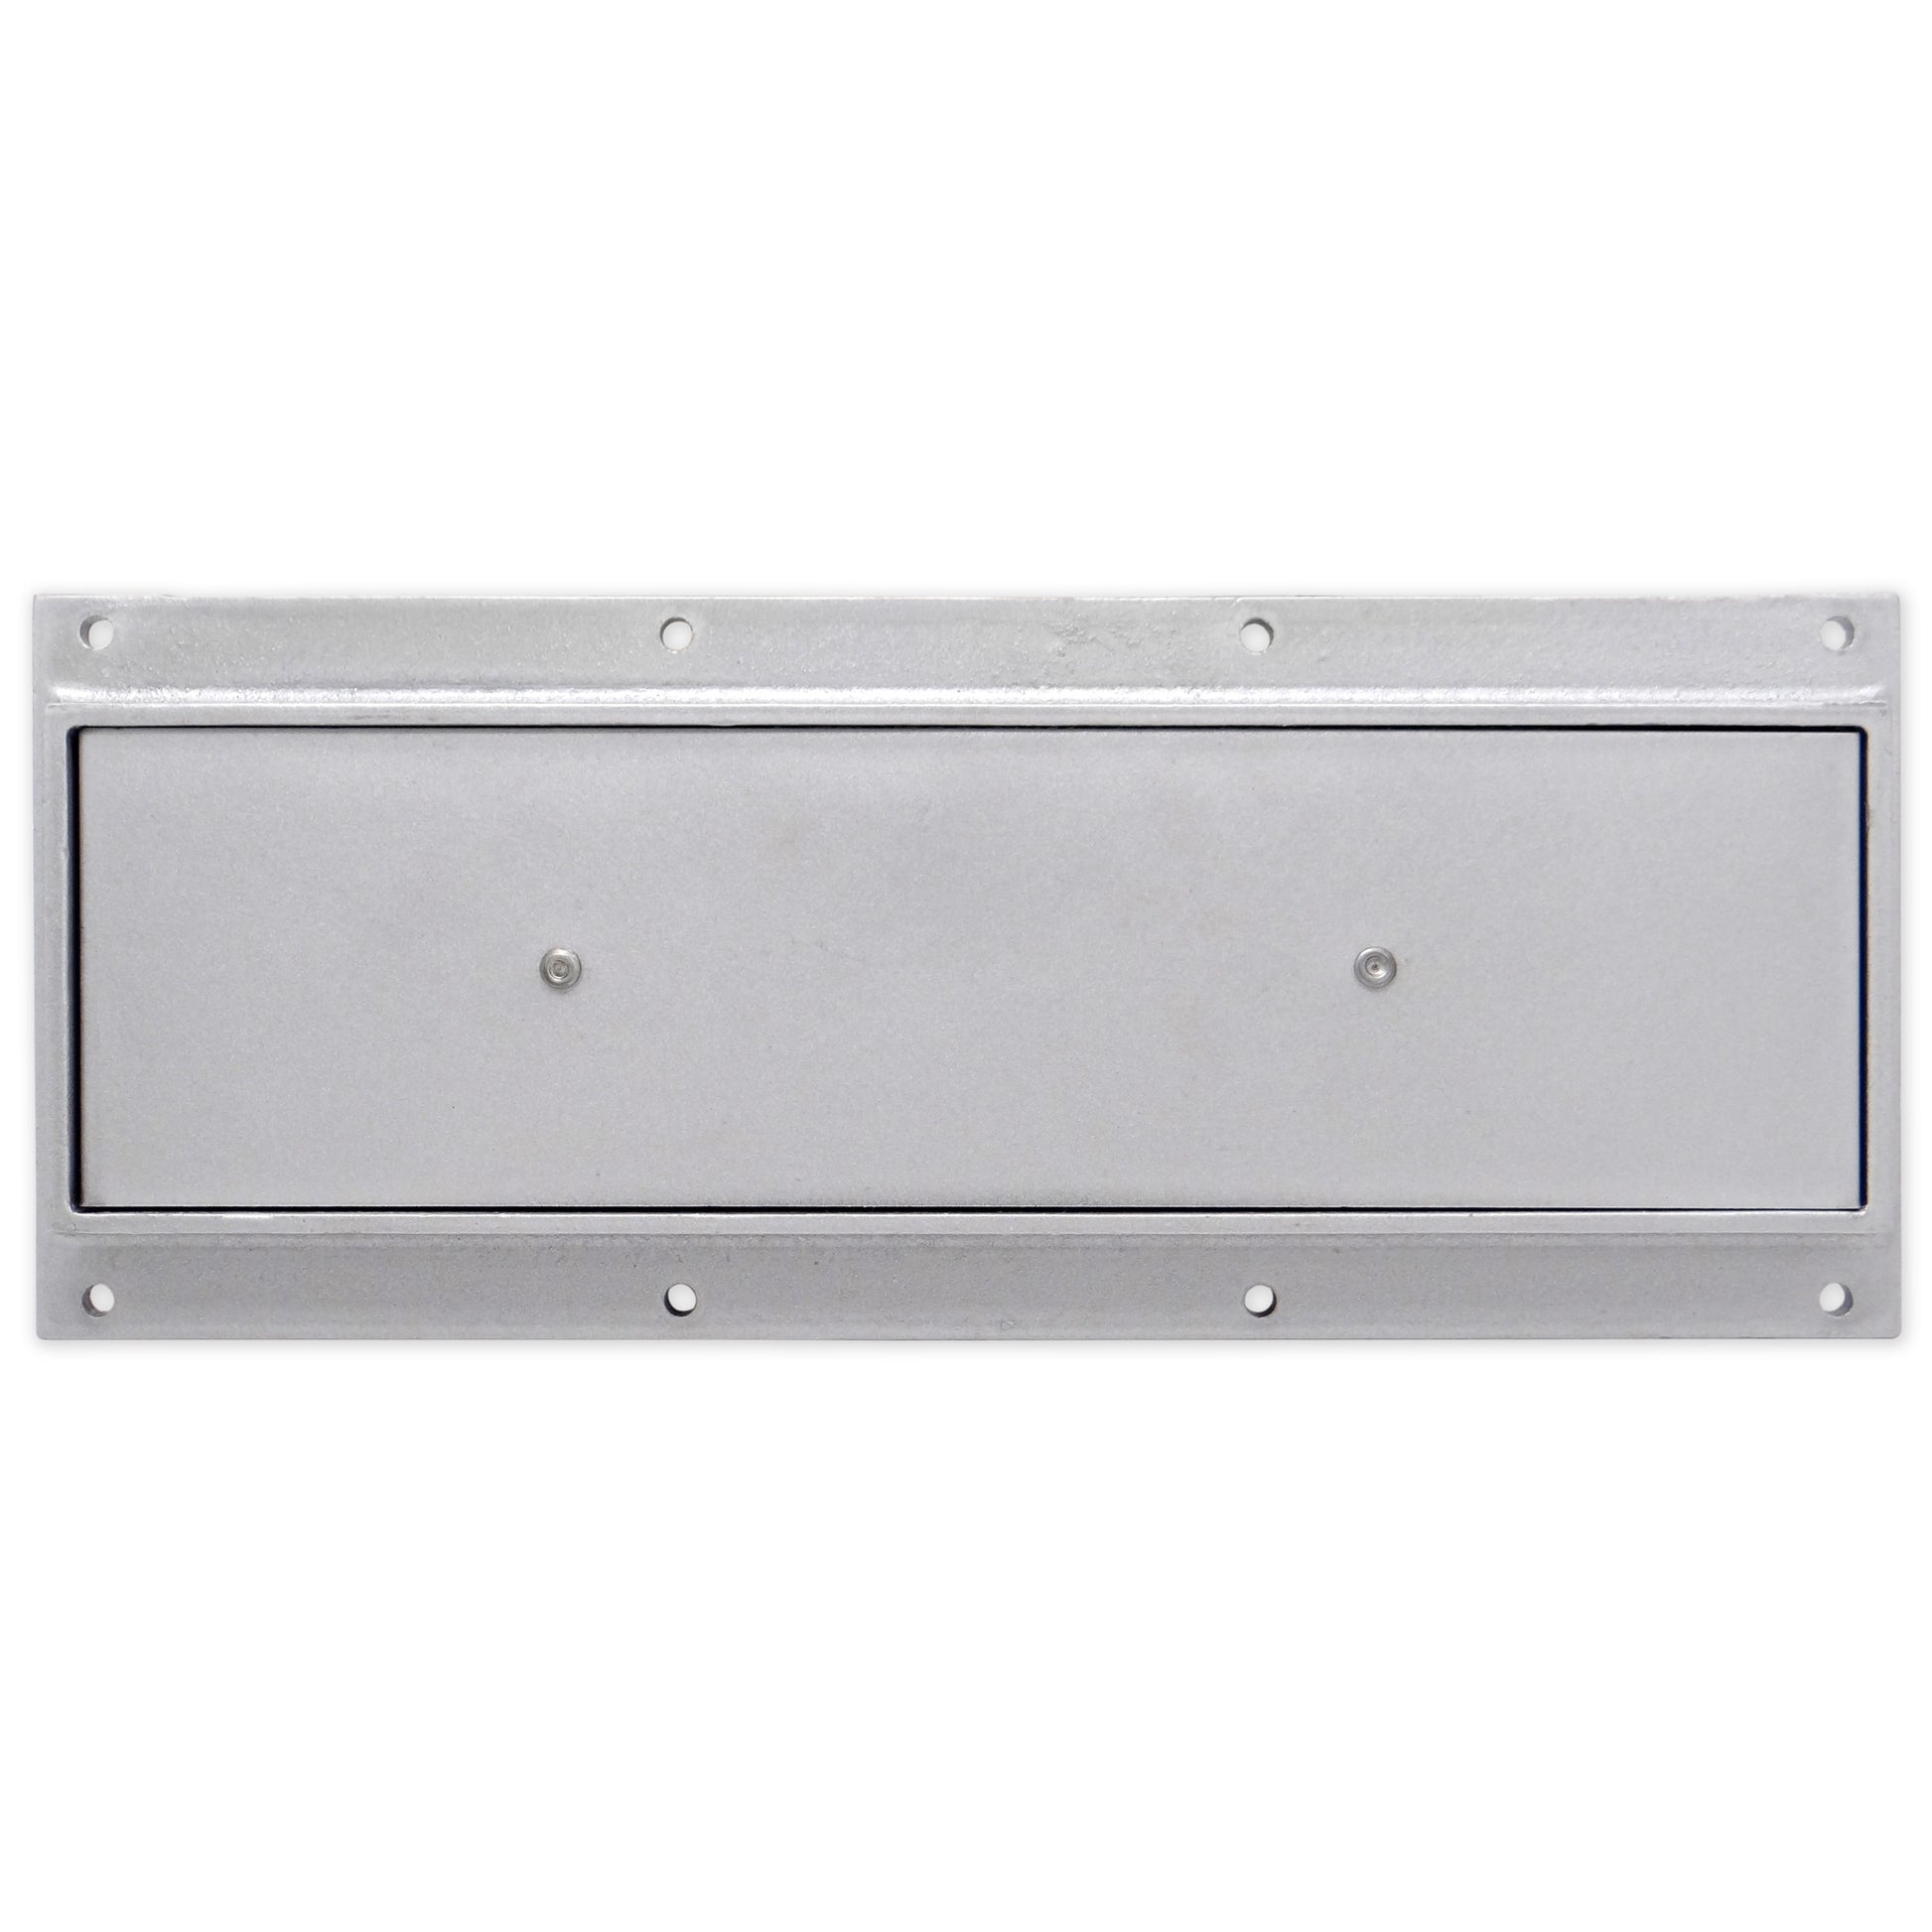 Load image into Gallery viewer, PMA1850 Light-Duty Plate Magnet - Top View